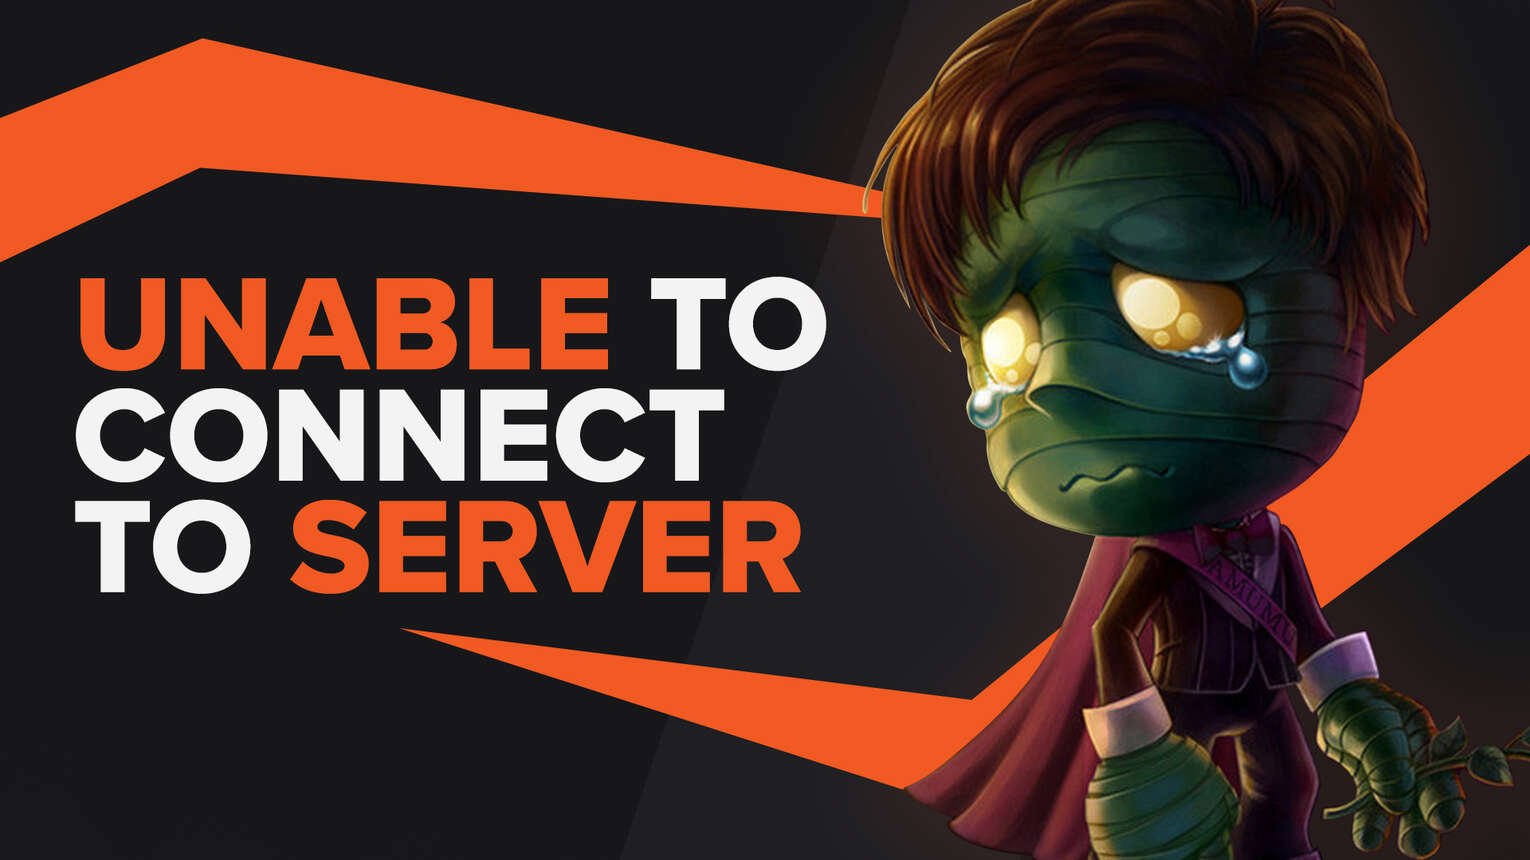 How To Fix “Unable To Connect To Server” in League of Legends